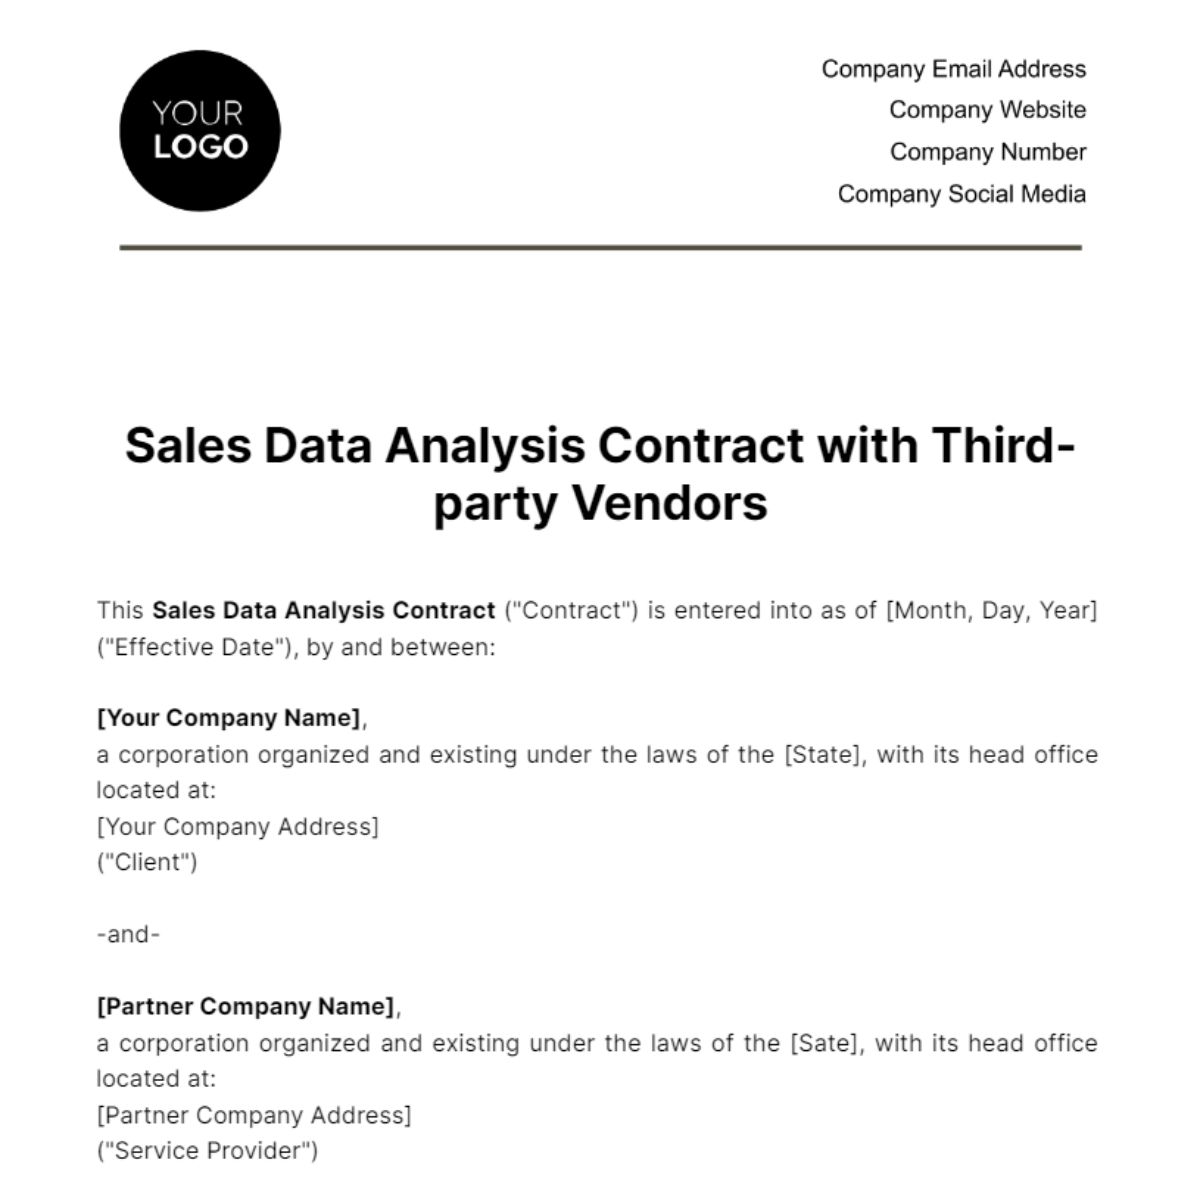 Free Sales Data Analysis Contract with Third-party Vendors Template